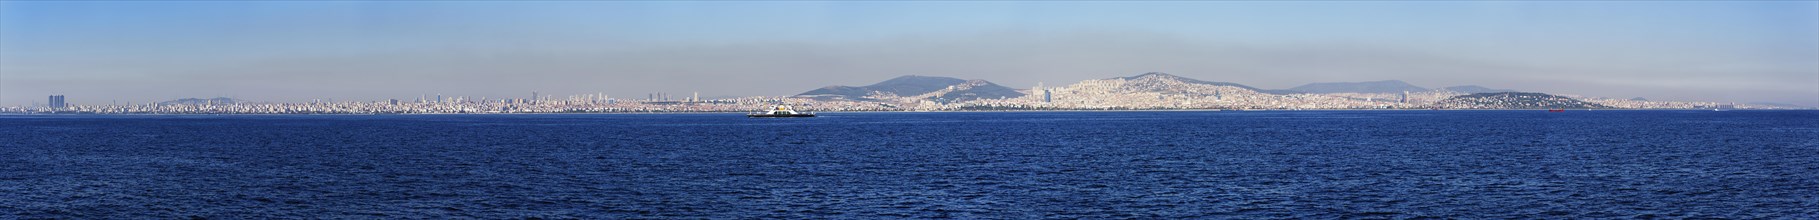 Panoramic view from the Marmara Sea with the Asian side of Istanbul